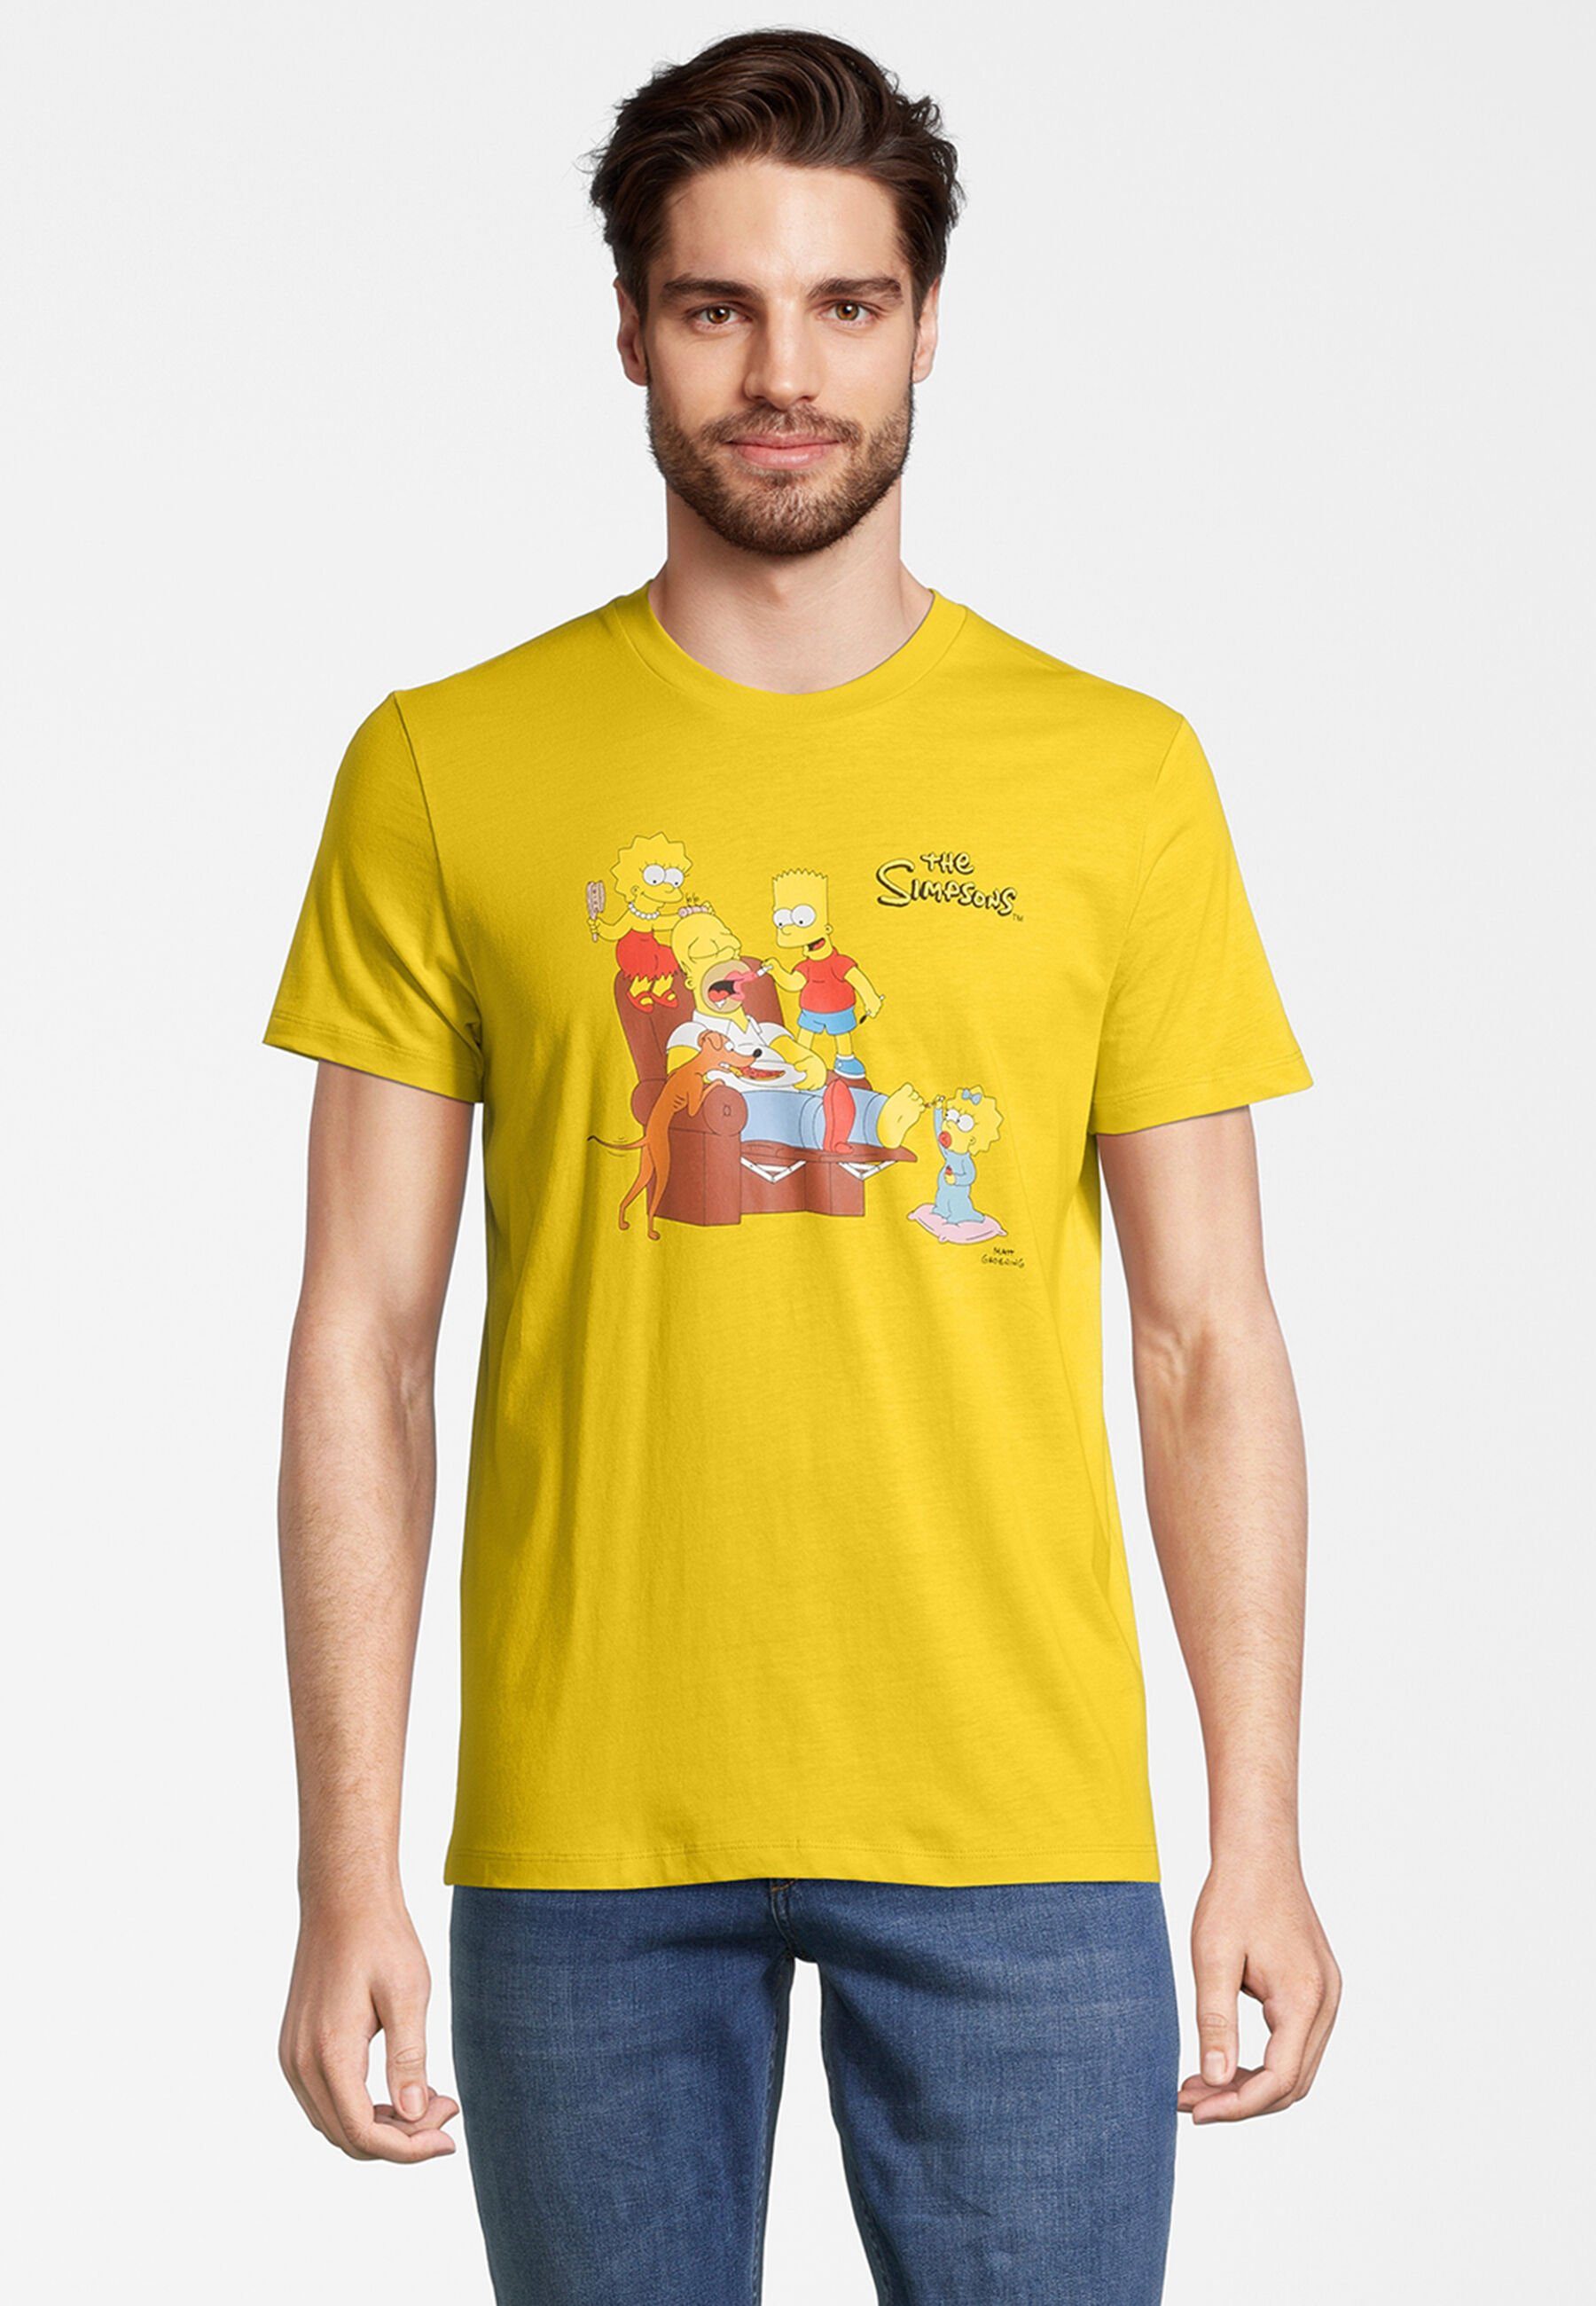 COURSE Print-Shirt The Simpsons